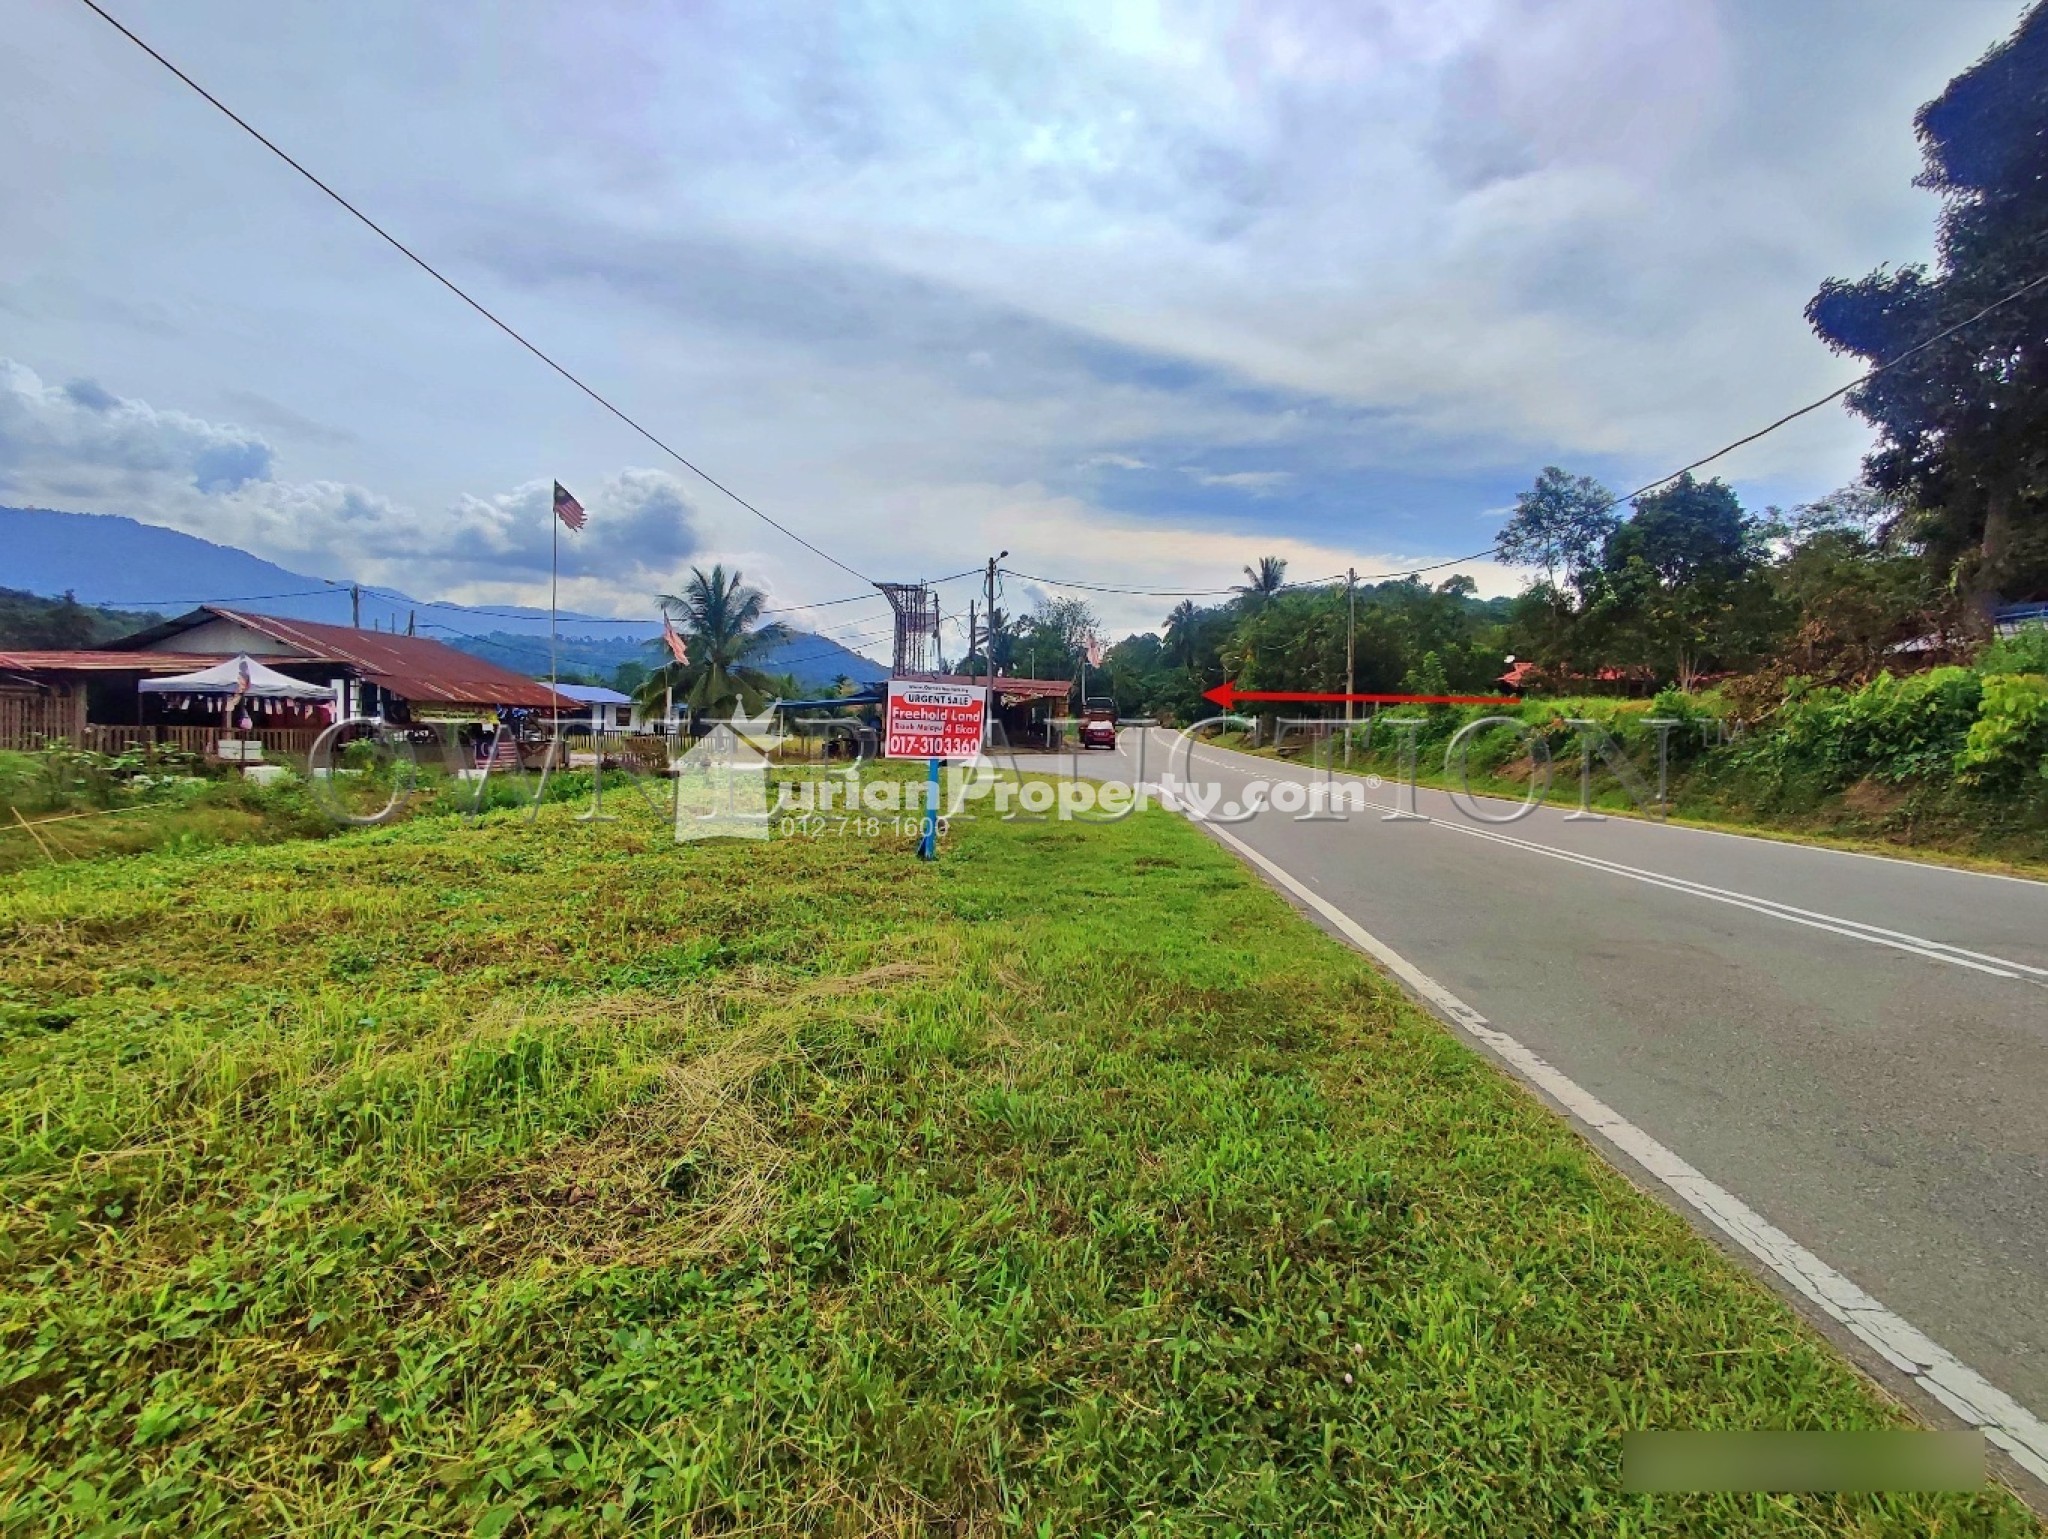 Agriculture Land For Auction at Kuala Klawang